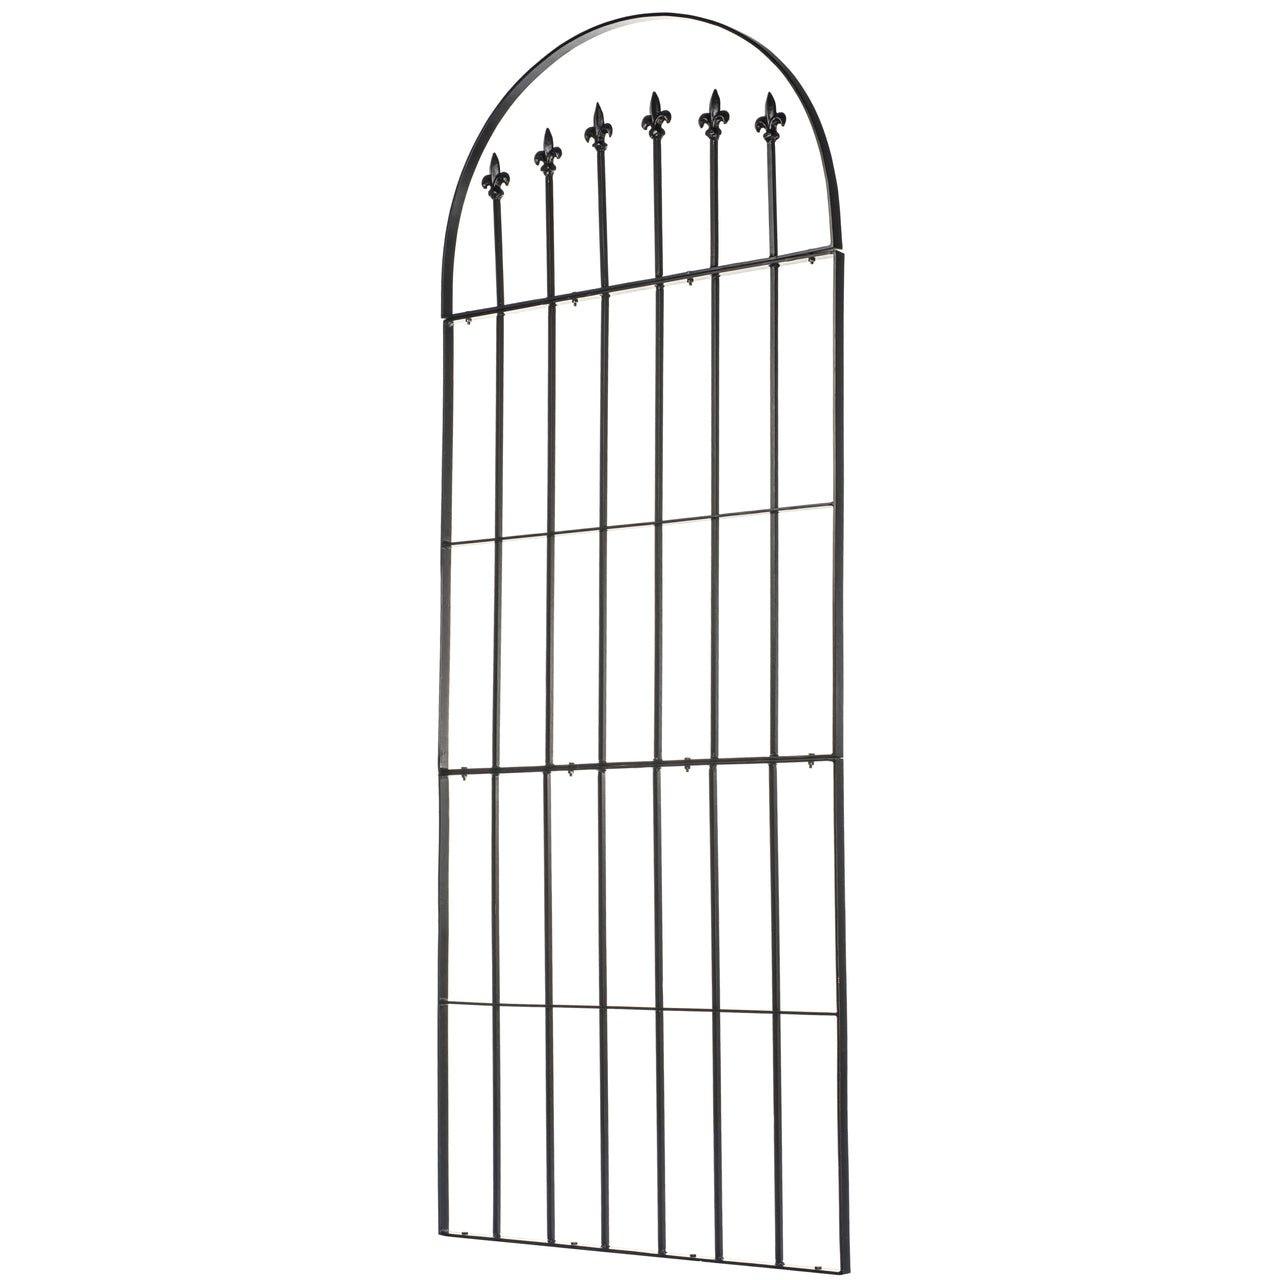 h potter wrought iron trellis metal scroll garden panel screen vines flower wedding arch outdoor lawn patio deck gift arbor obelisk pot indoor archway yard rustic wall art climbing plants ivy topiary home decor plant planter fence lattice housewarming privacy air conditioner cover vertical arched vine support tall landscapers